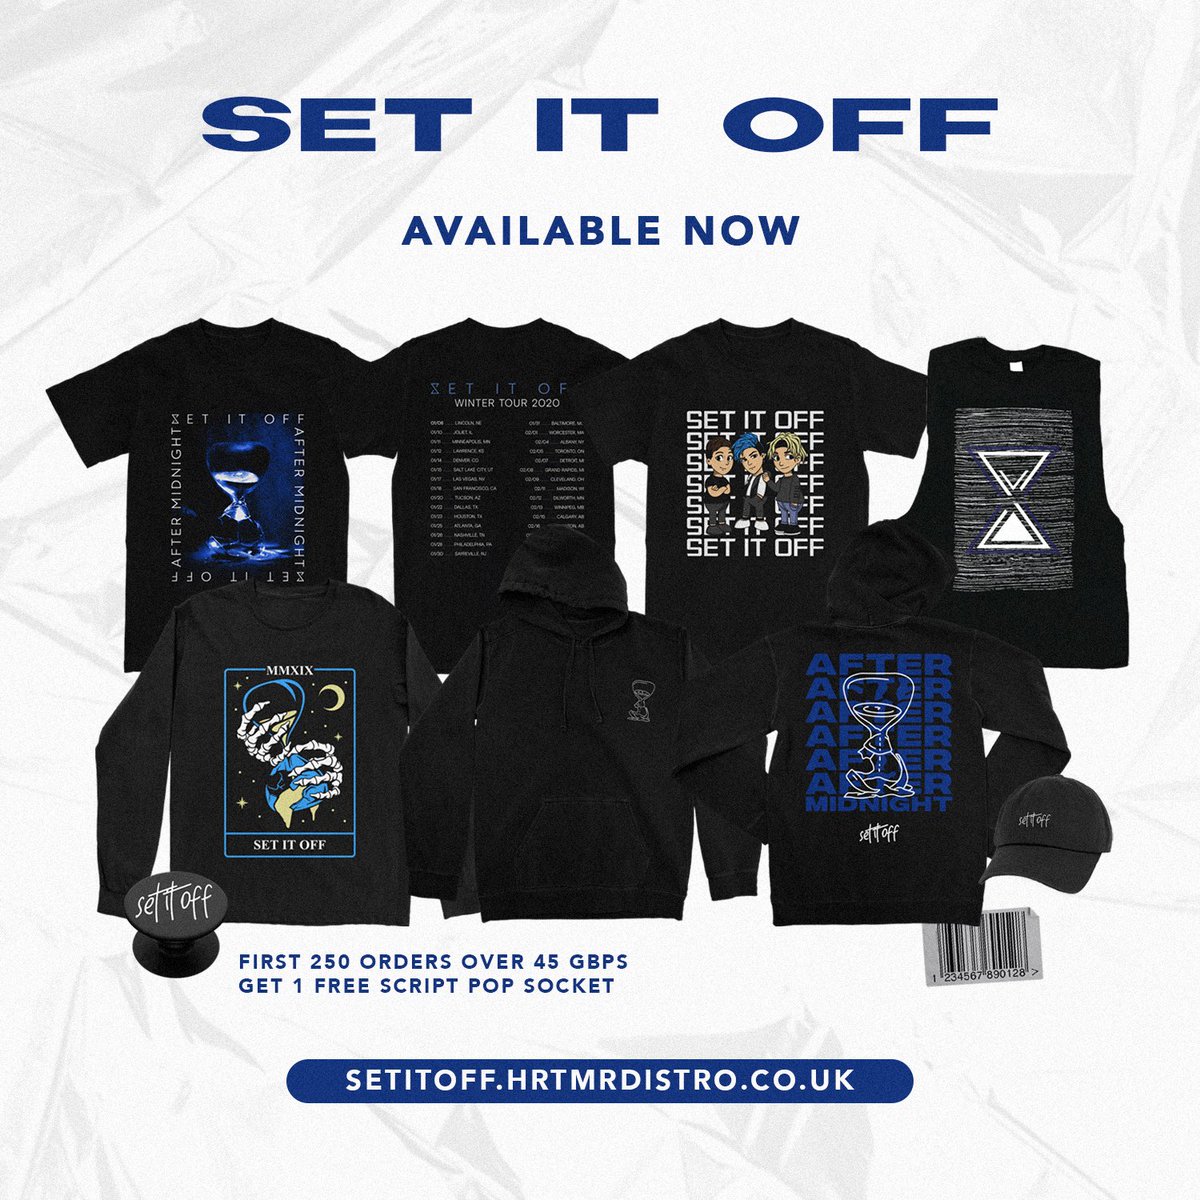 And for our friends in the UK/EU, we have some exclusive merch designs that were meant for our upcoming UK/EU tour that are available now just for you ⌛️ setitoff.hrtmrdistro.co.uk